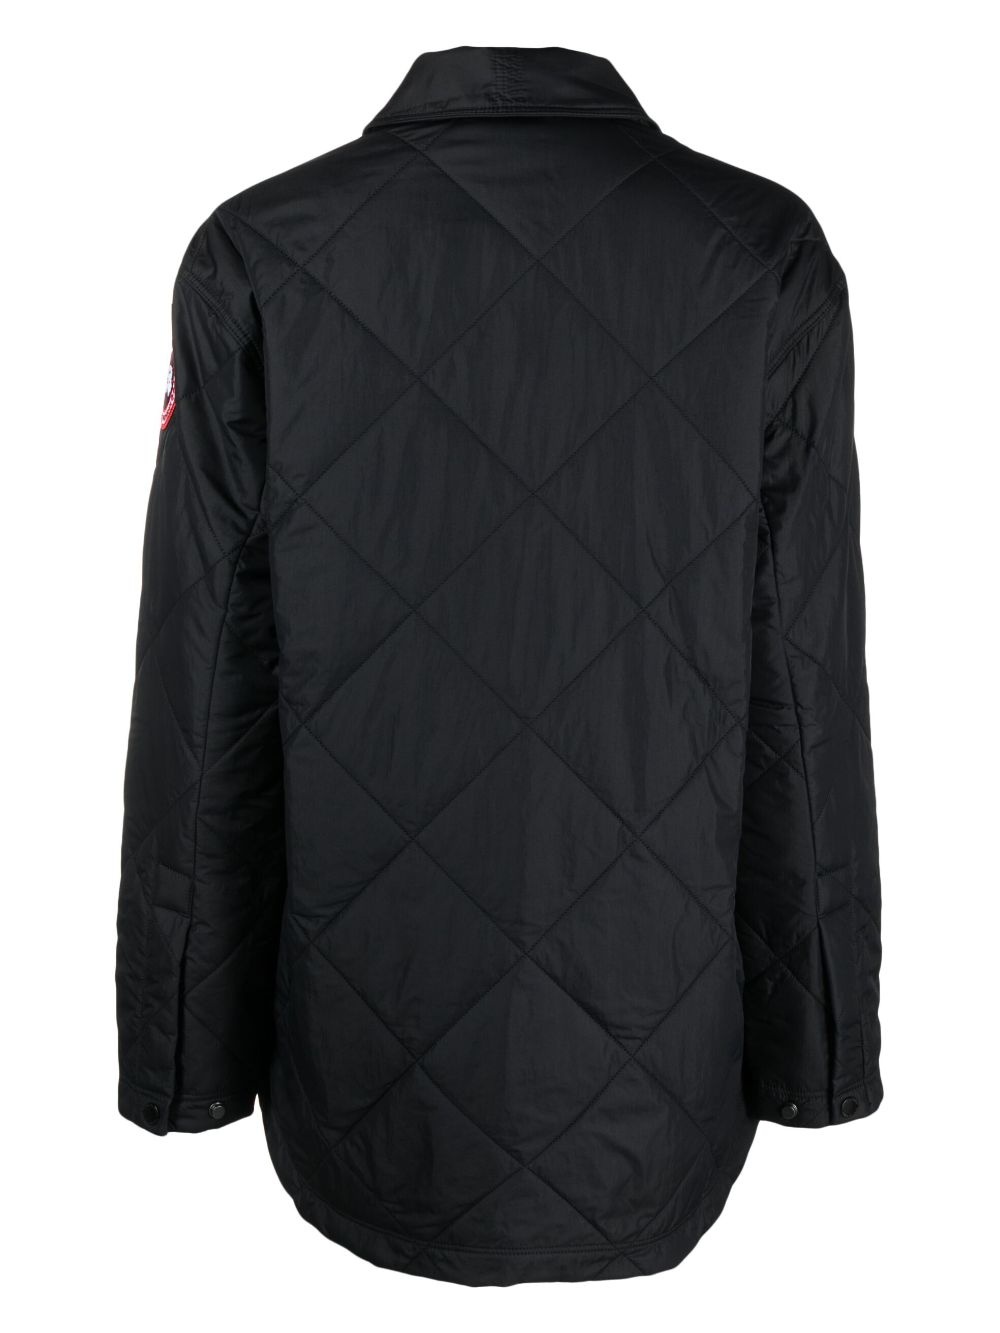 Albany quilted shirt jacket - 2